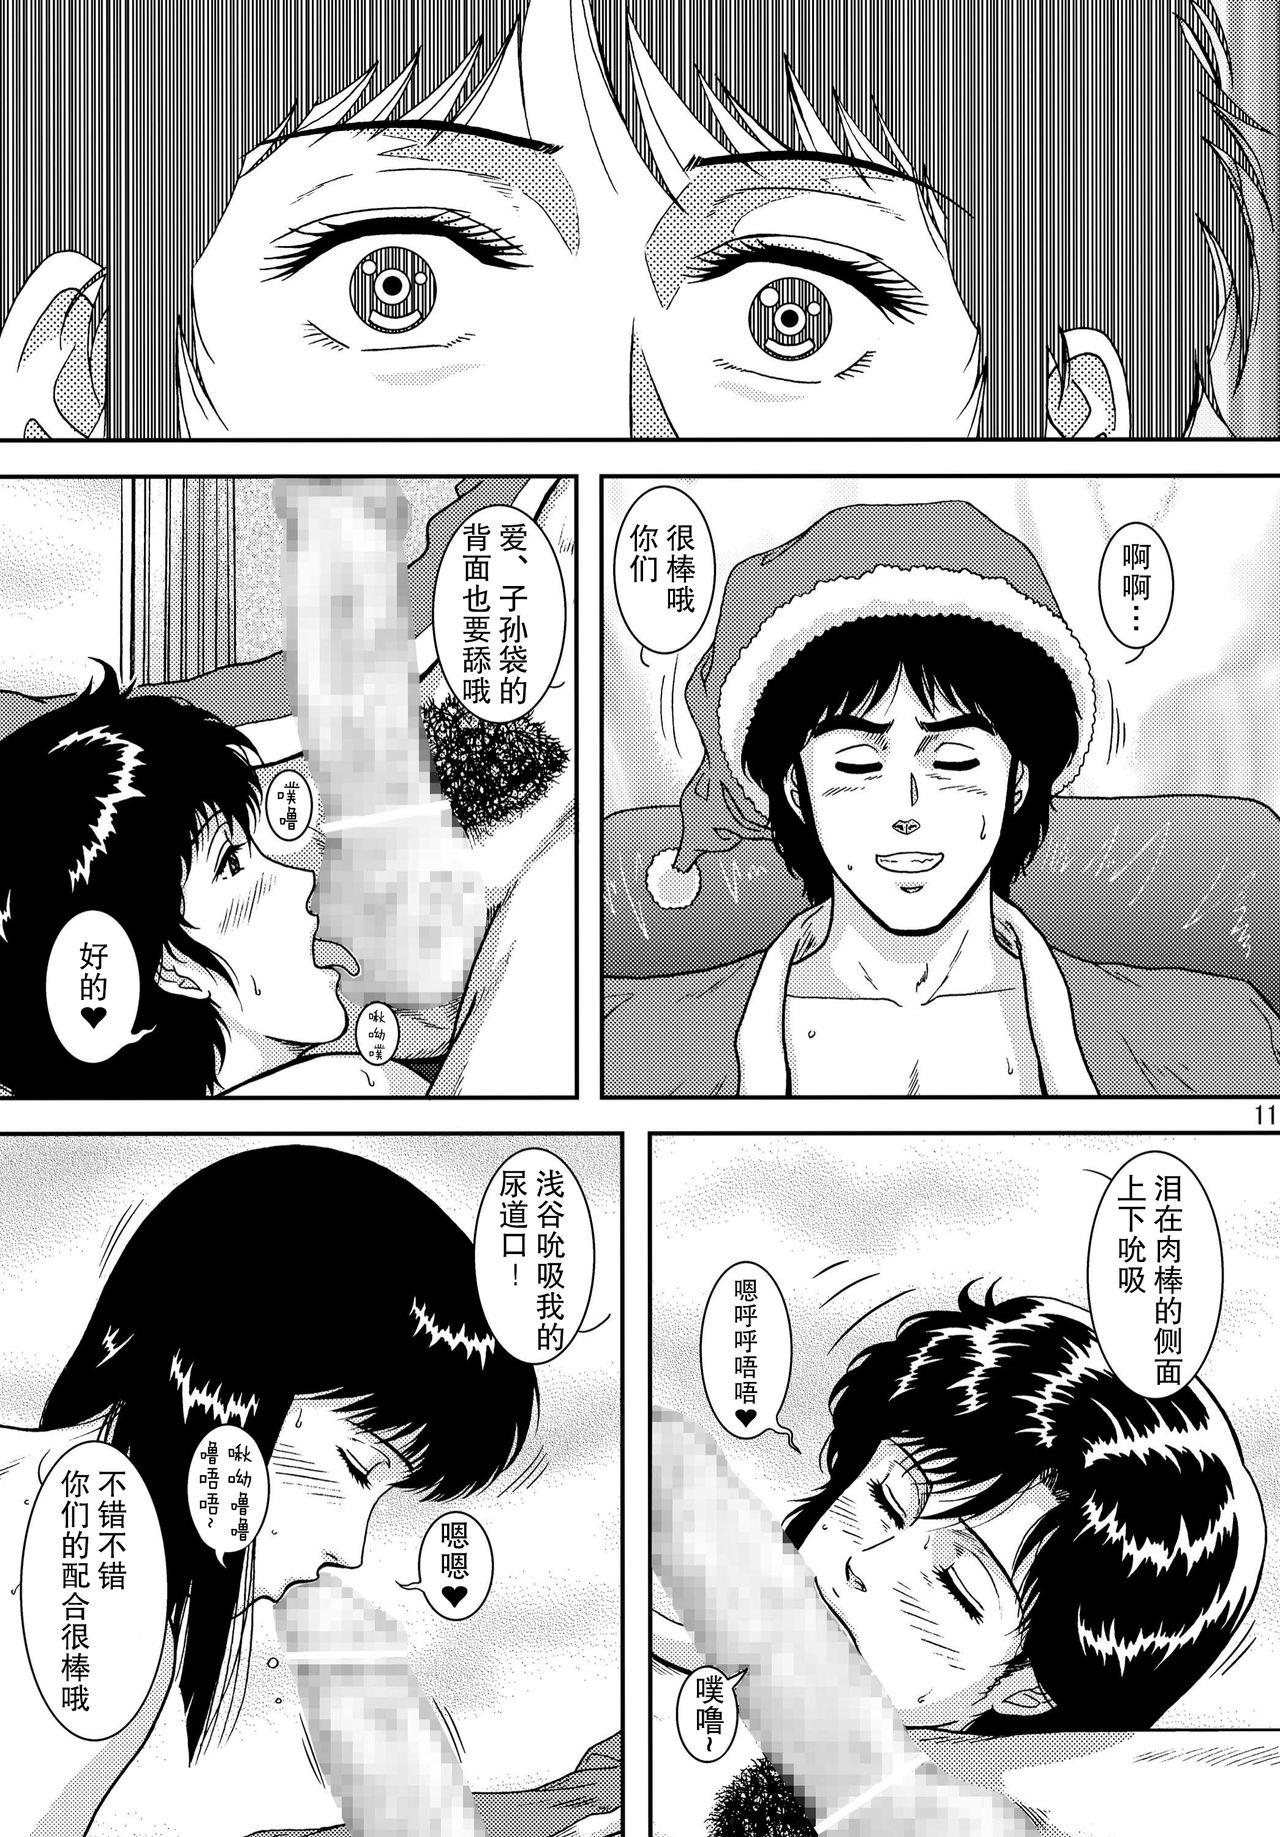 Orgasmus NIGHTFLY vol.10 PLEASE COME HOME for X'mas - Cats eye Seduction - Page 11